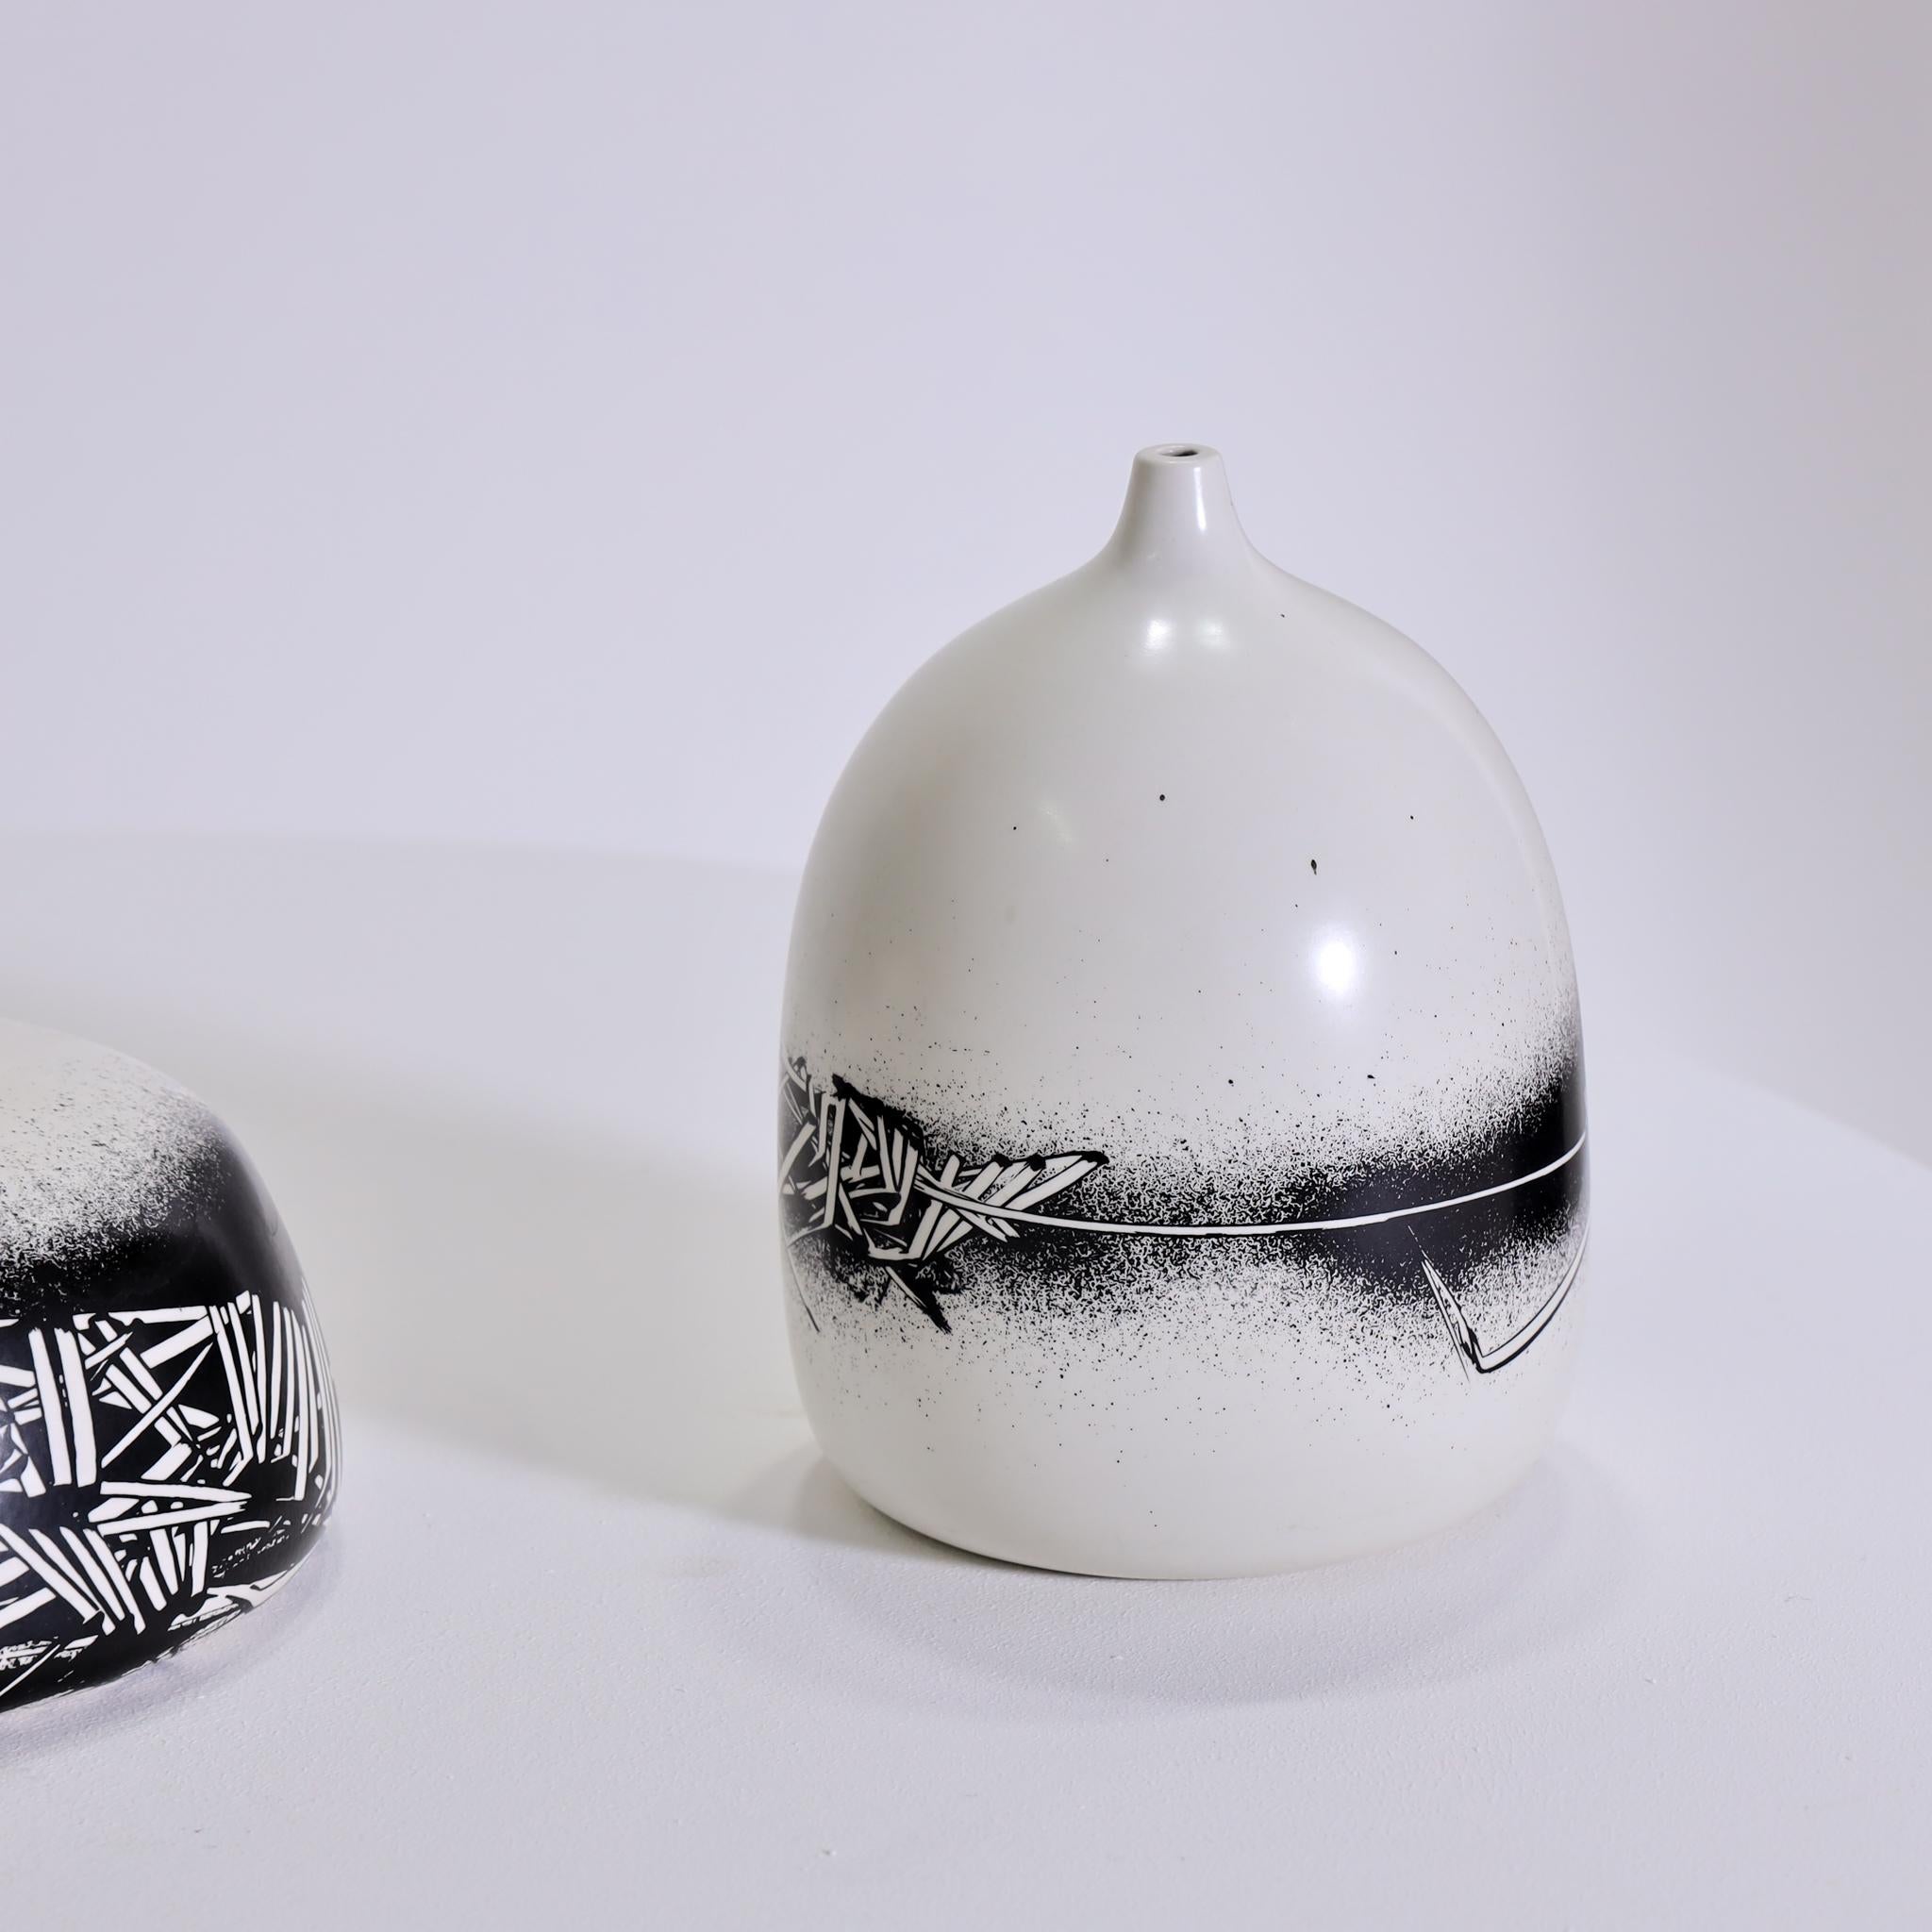 Three ceramic vases designed by Emilio Scanavino for Motta, Italy, dating back to the 1970s. These off-white vases feature a distinctive black asymmetrical graffito pattern. Each vase is labeled at the bottom and numbered as part of a limited